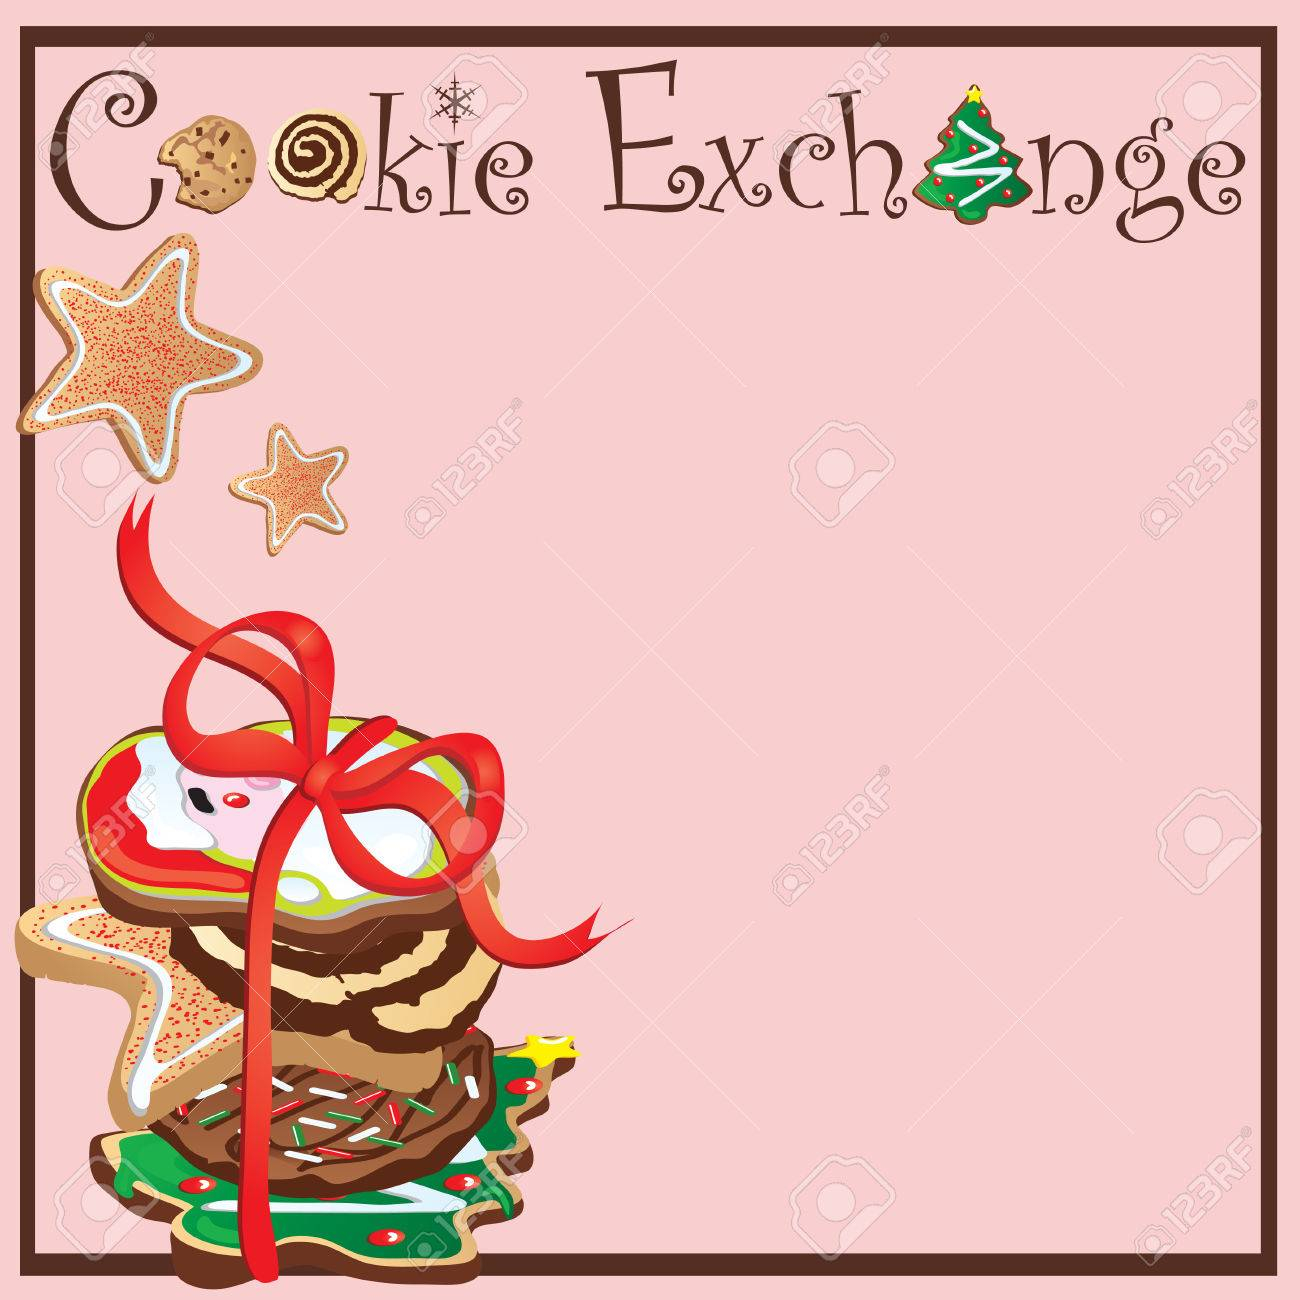 Invitation For A Cookie Exchange Party Royalty Free Cliparts for proportions 1300 X 1300